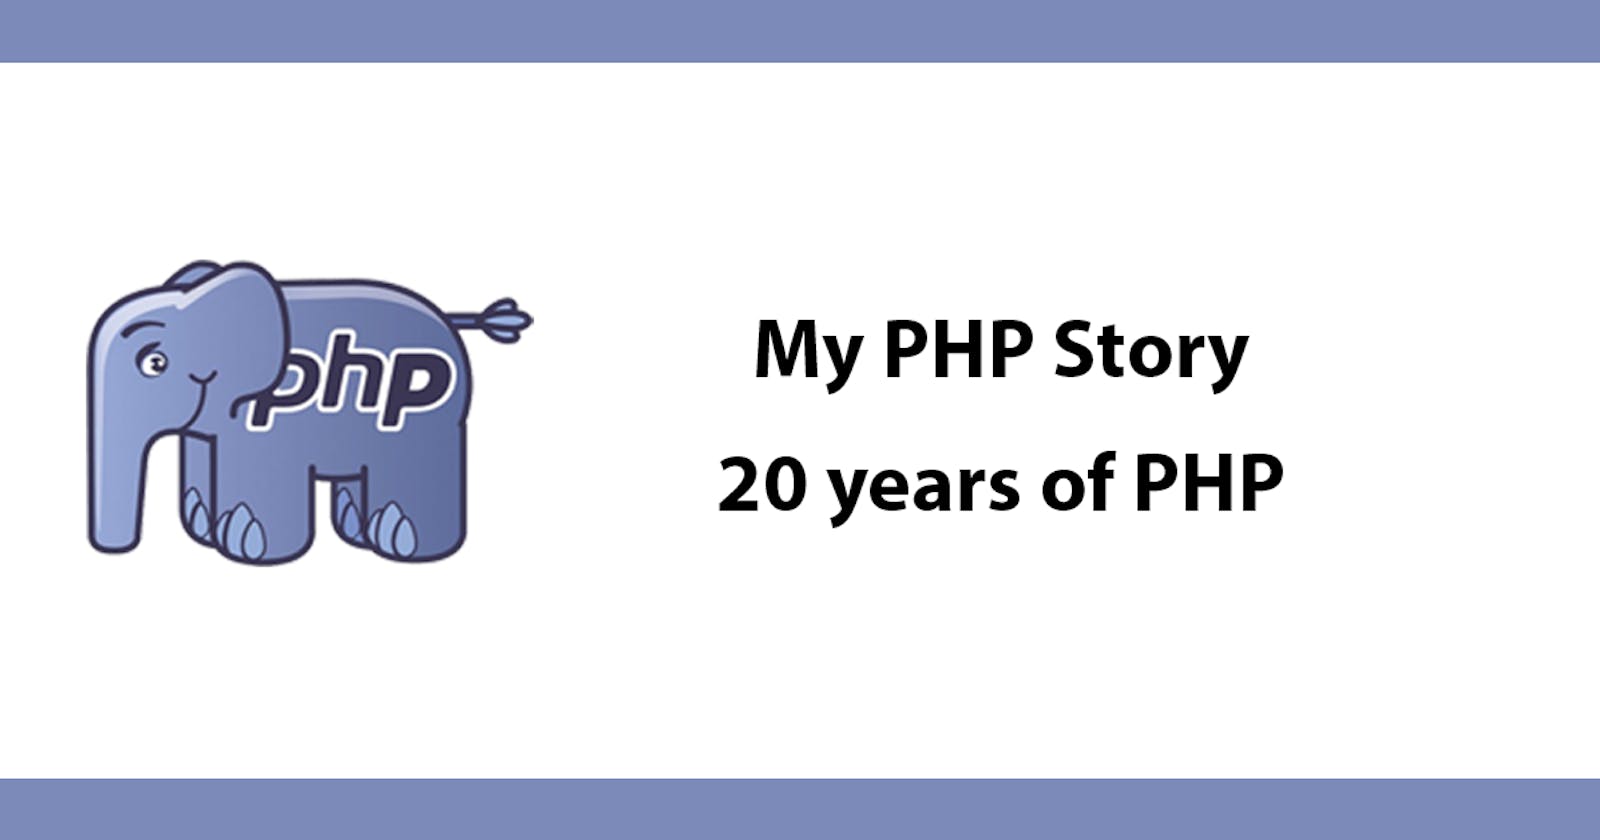 My PHP Story - 20 years of PHP